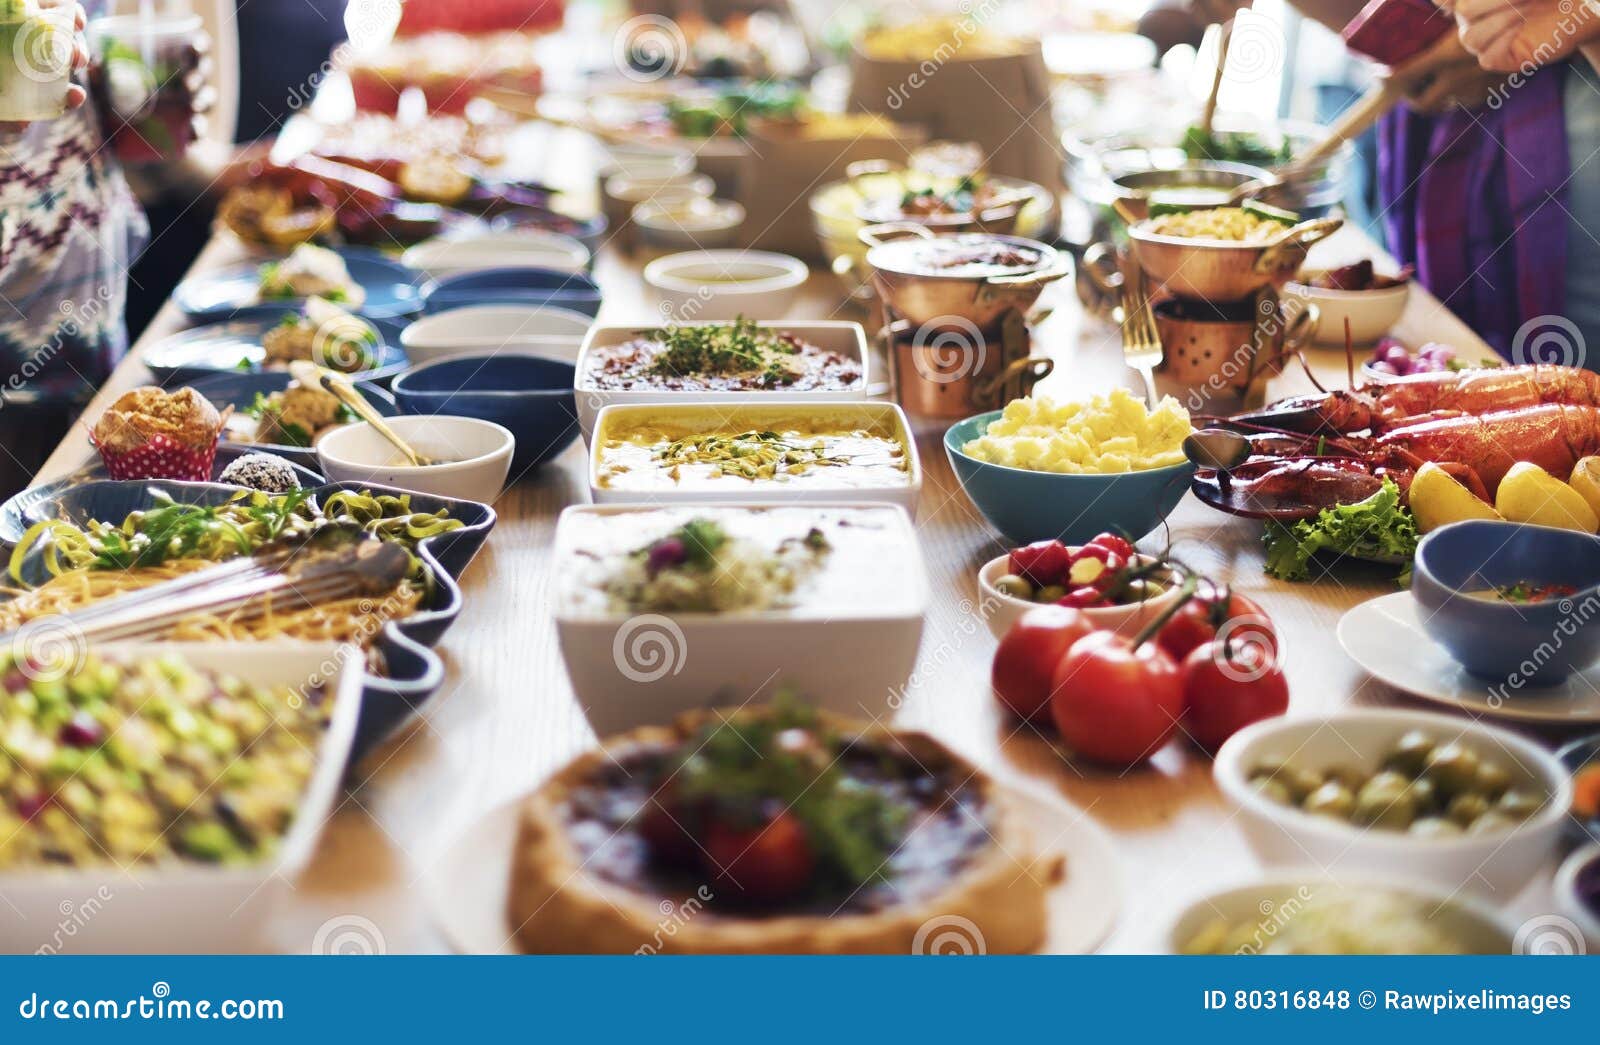 catering eating companionship buffet festive concept